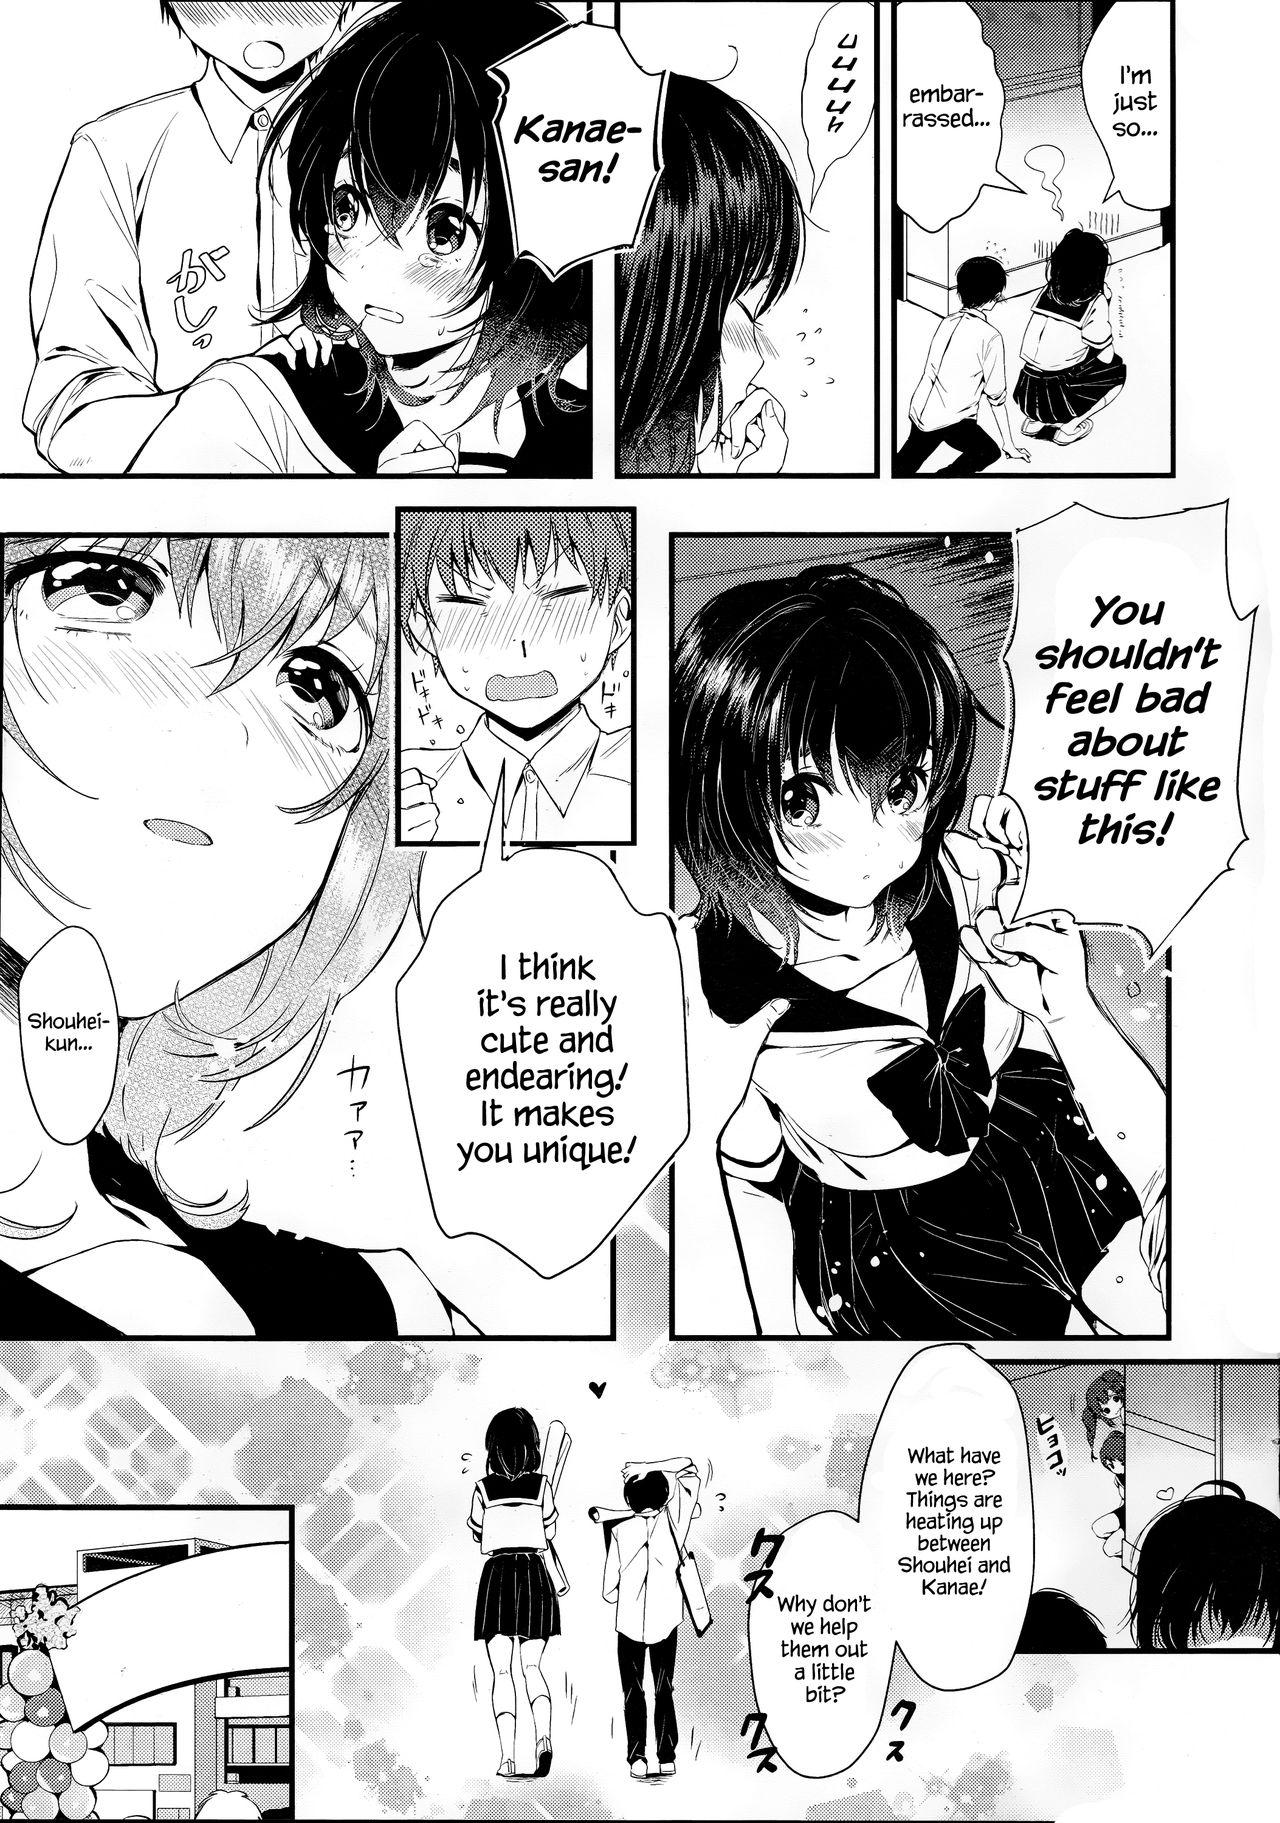 Brother Unmei no Kokuhaku | The Destined Confession Submission - Page 3